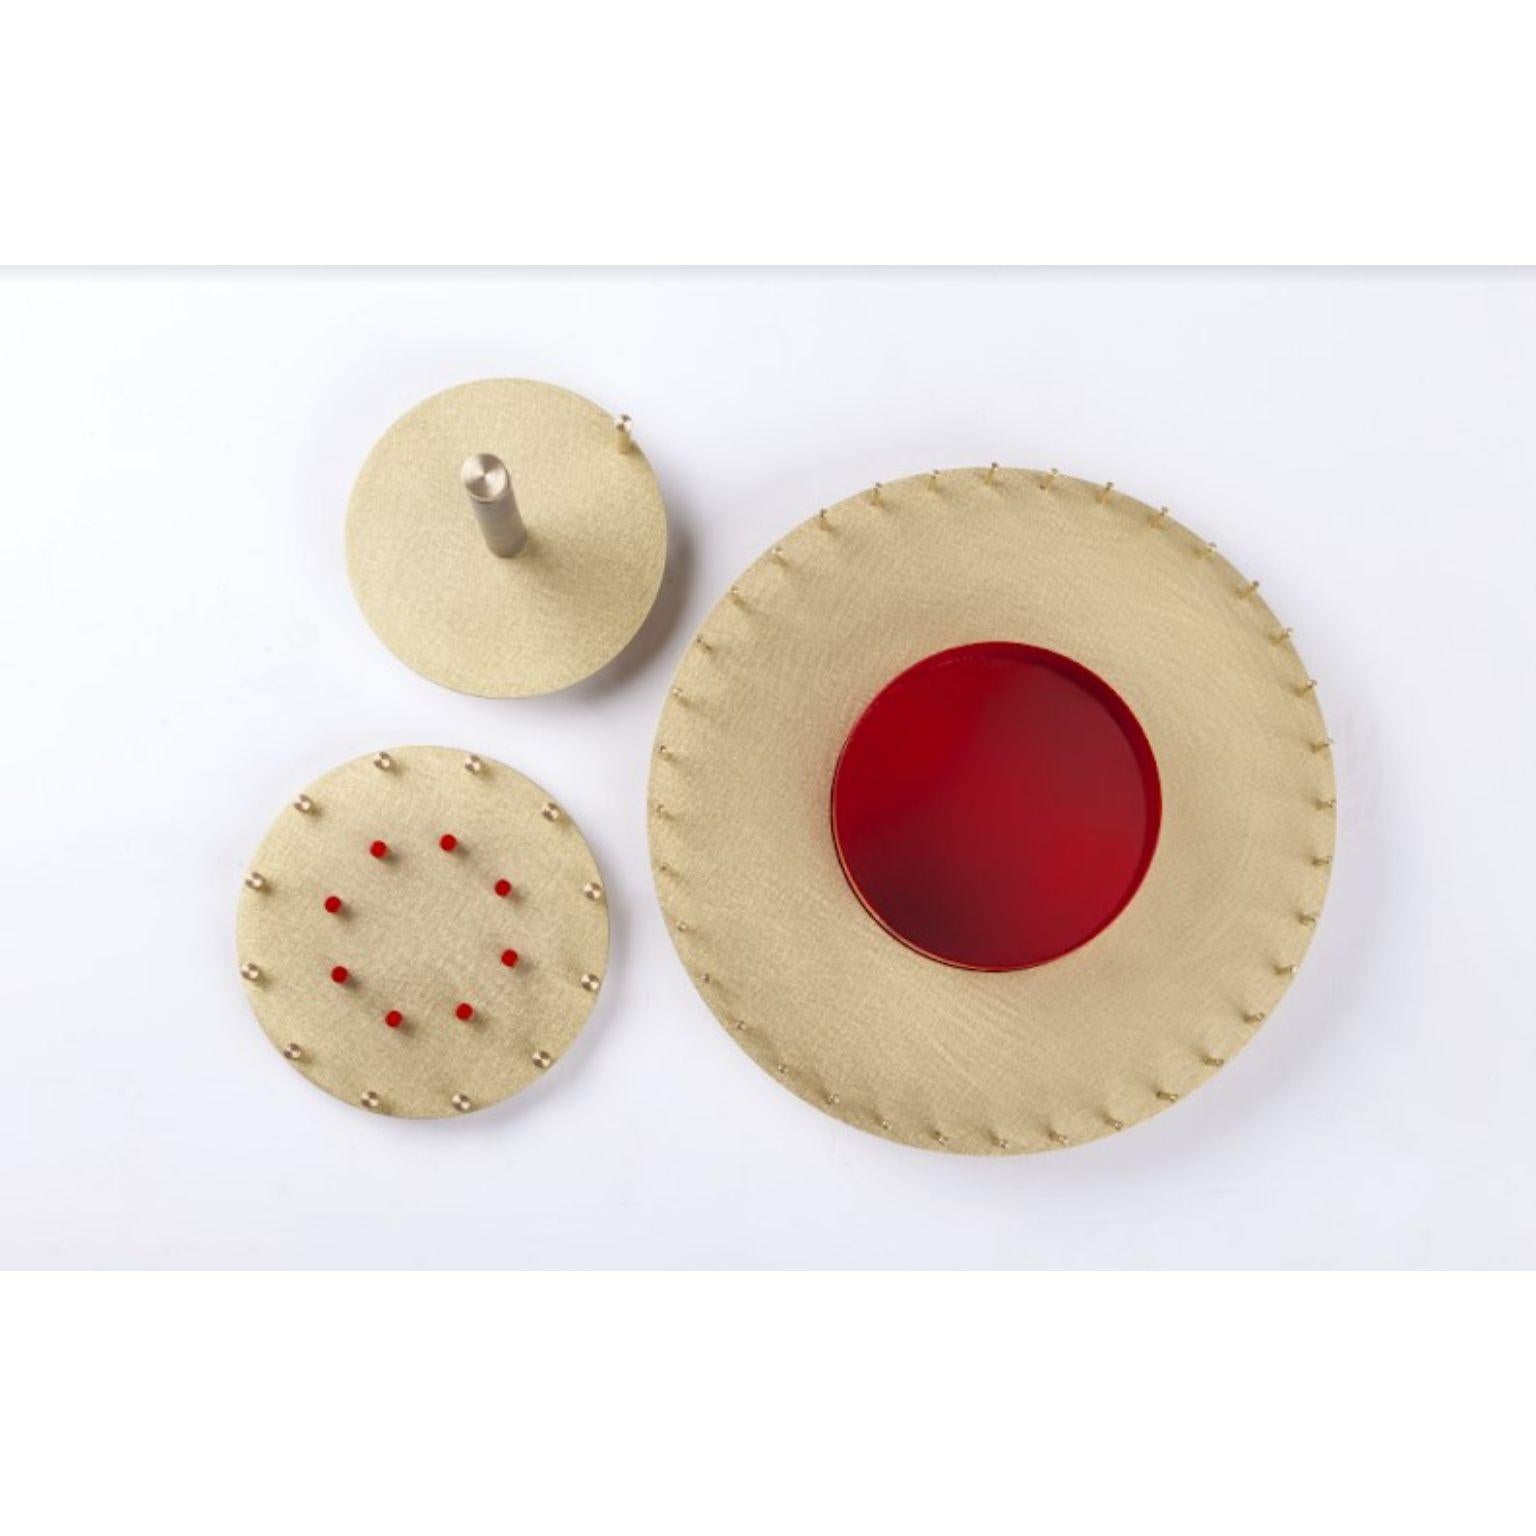 Set of 3 Elementa Trivet , fruit holder, and paper roll holder by Mingardo
Dimensions: D7.8 x H28.5 cm // D16.5 x H8.5 // D9 x H2.5 cm
Materials:Natural satin brass and natural varnished iron
Weight: 8 kg

Also Available in different